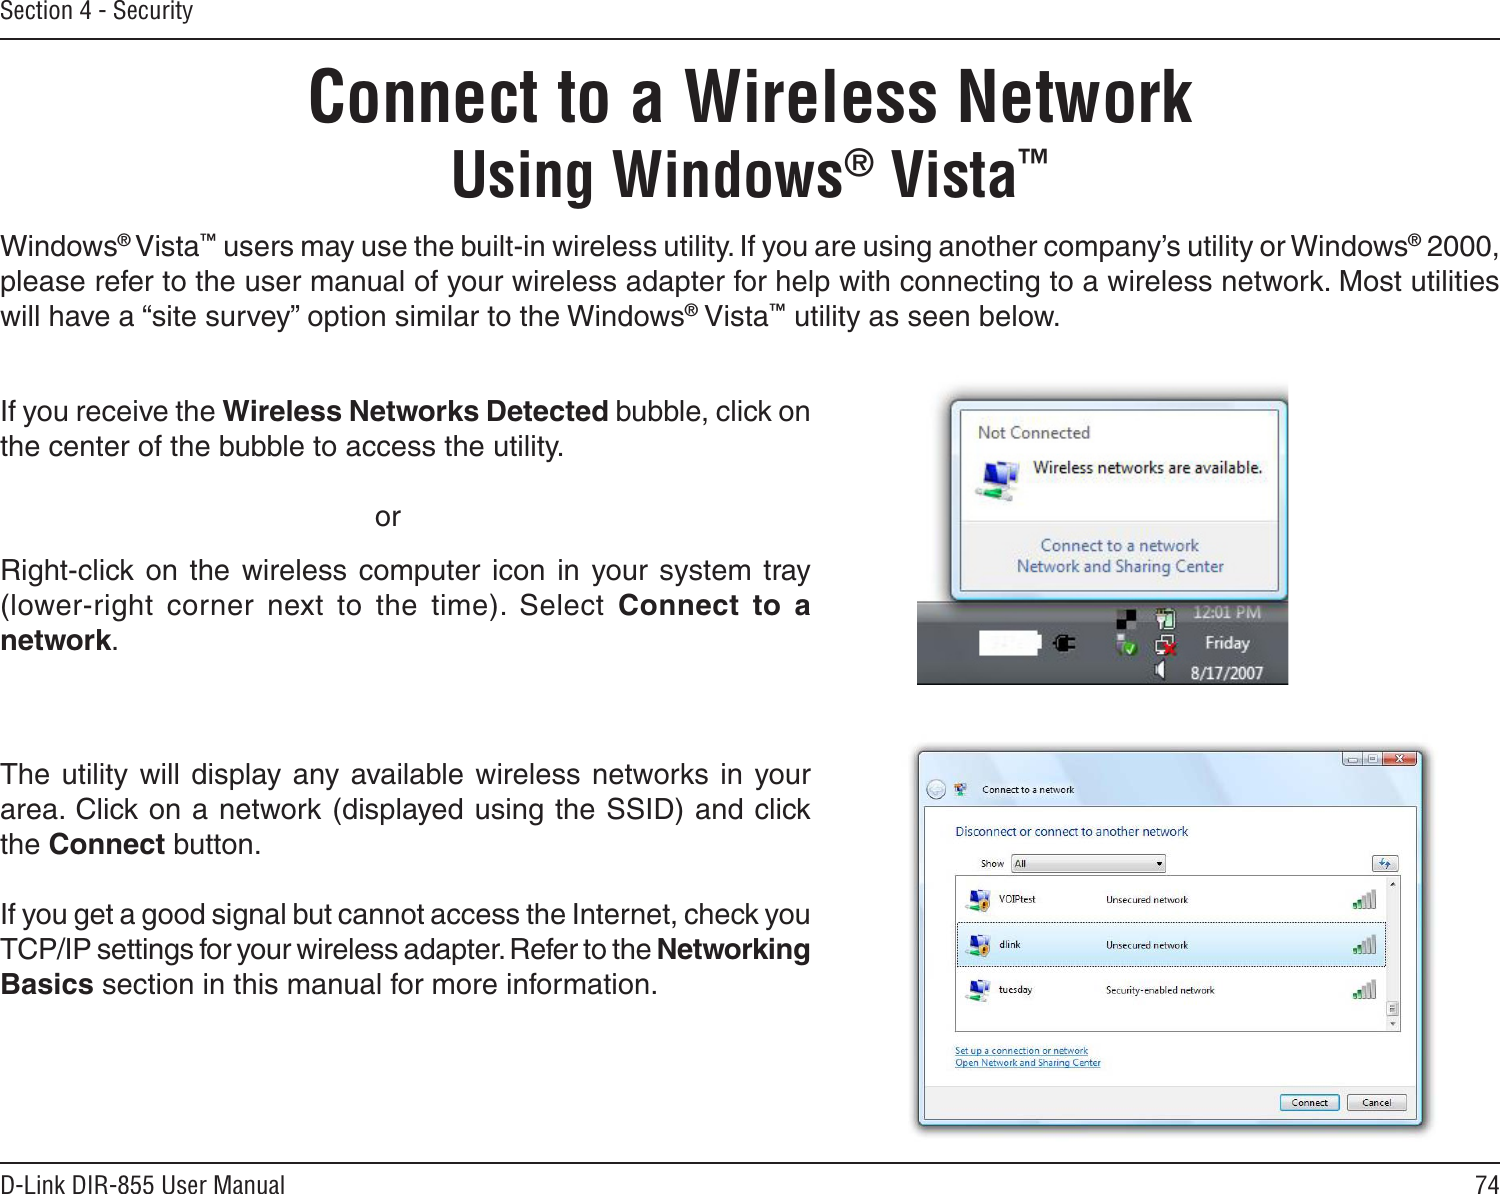 74D-Link DIR-855 User ManualSection 4 - SecurityConnect to a Wireless NetworkUsing Windows® Vista™Windows® Vista™ users may use the built-in wireless utility. If you are using another company’s utility or Windows® 2000, please refer to the user manual of your wireless adapter for help with connecting to a wireless network. Most utilities will have a “site survey” option similar to the Windows® Vista™ utility as seen below.Right-click  on  the  wireless  computer  icon  in  your system  tray (lower-right  corner  next  to  the  time).  Select  Connect  to  a network.If you receive the Wireless Networks Detected bubble, click on the center of the bubble to access the utility.     orThe utility will display  any available wireless networks  in  your area. Click on a network (displayed using the SSID) and click the Connect button.If you get a good signal but cannot access the Internet, check you TCP/IP settings for your wireless adapter. Refer to the Networking Basics section in this manual for more information.